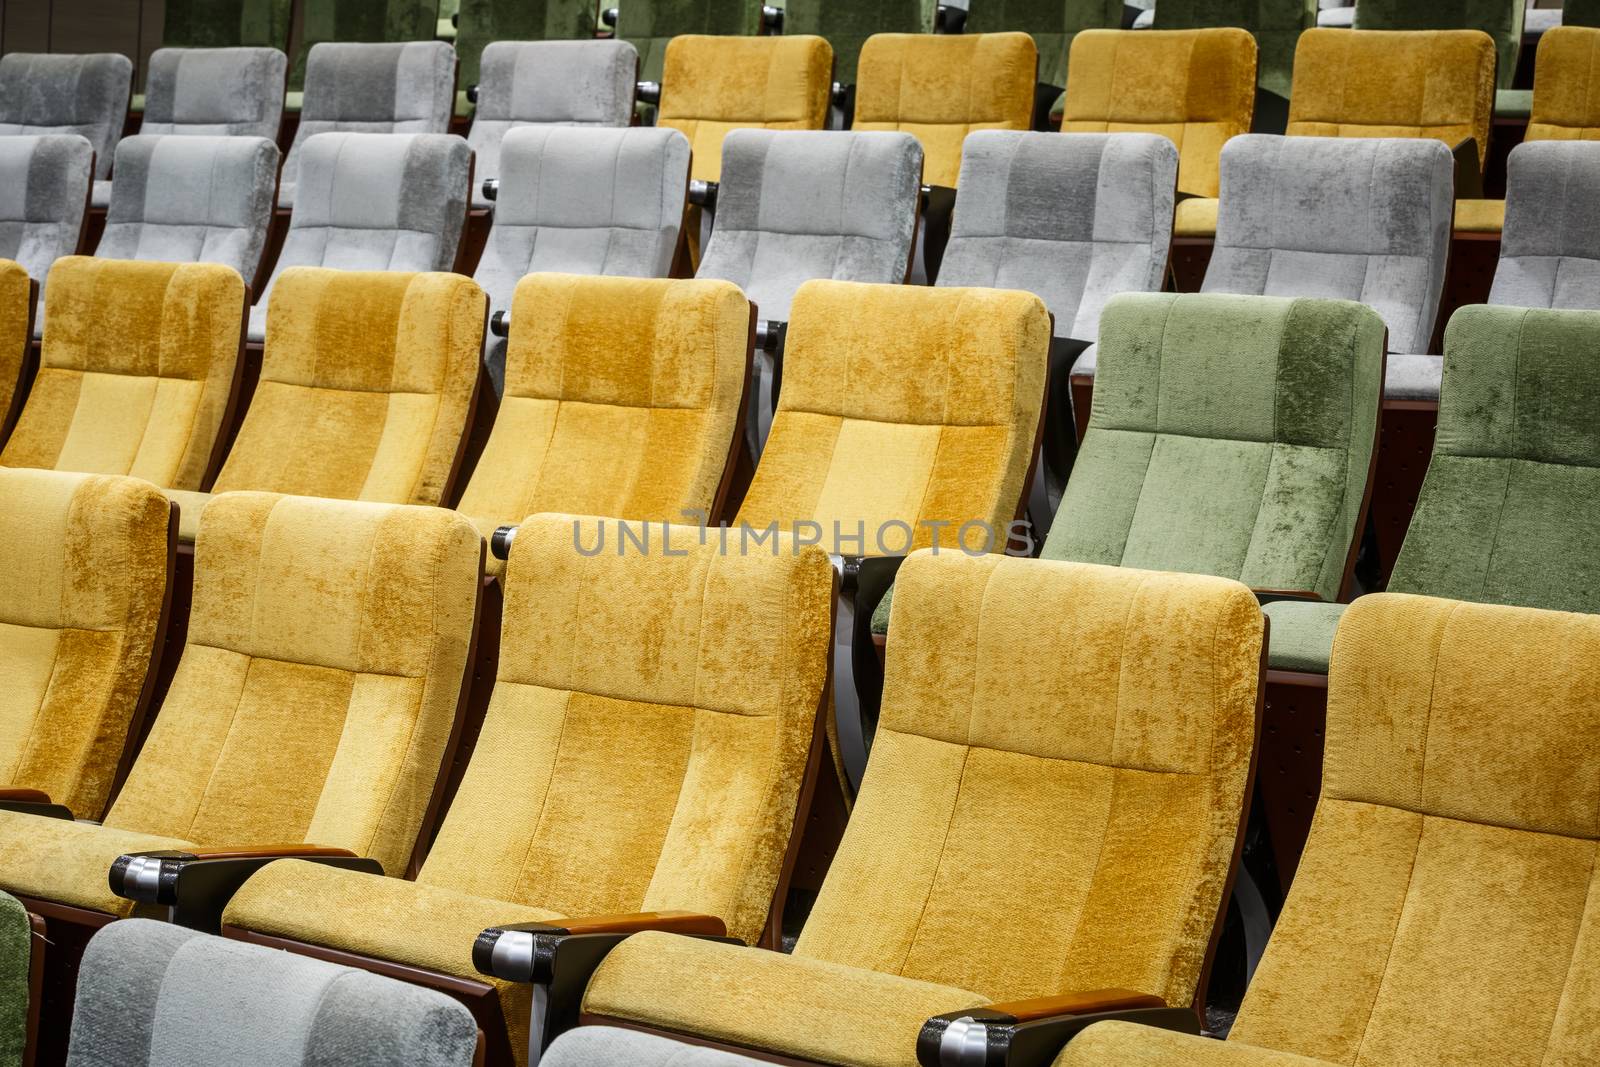 vacant theater chair in  hall